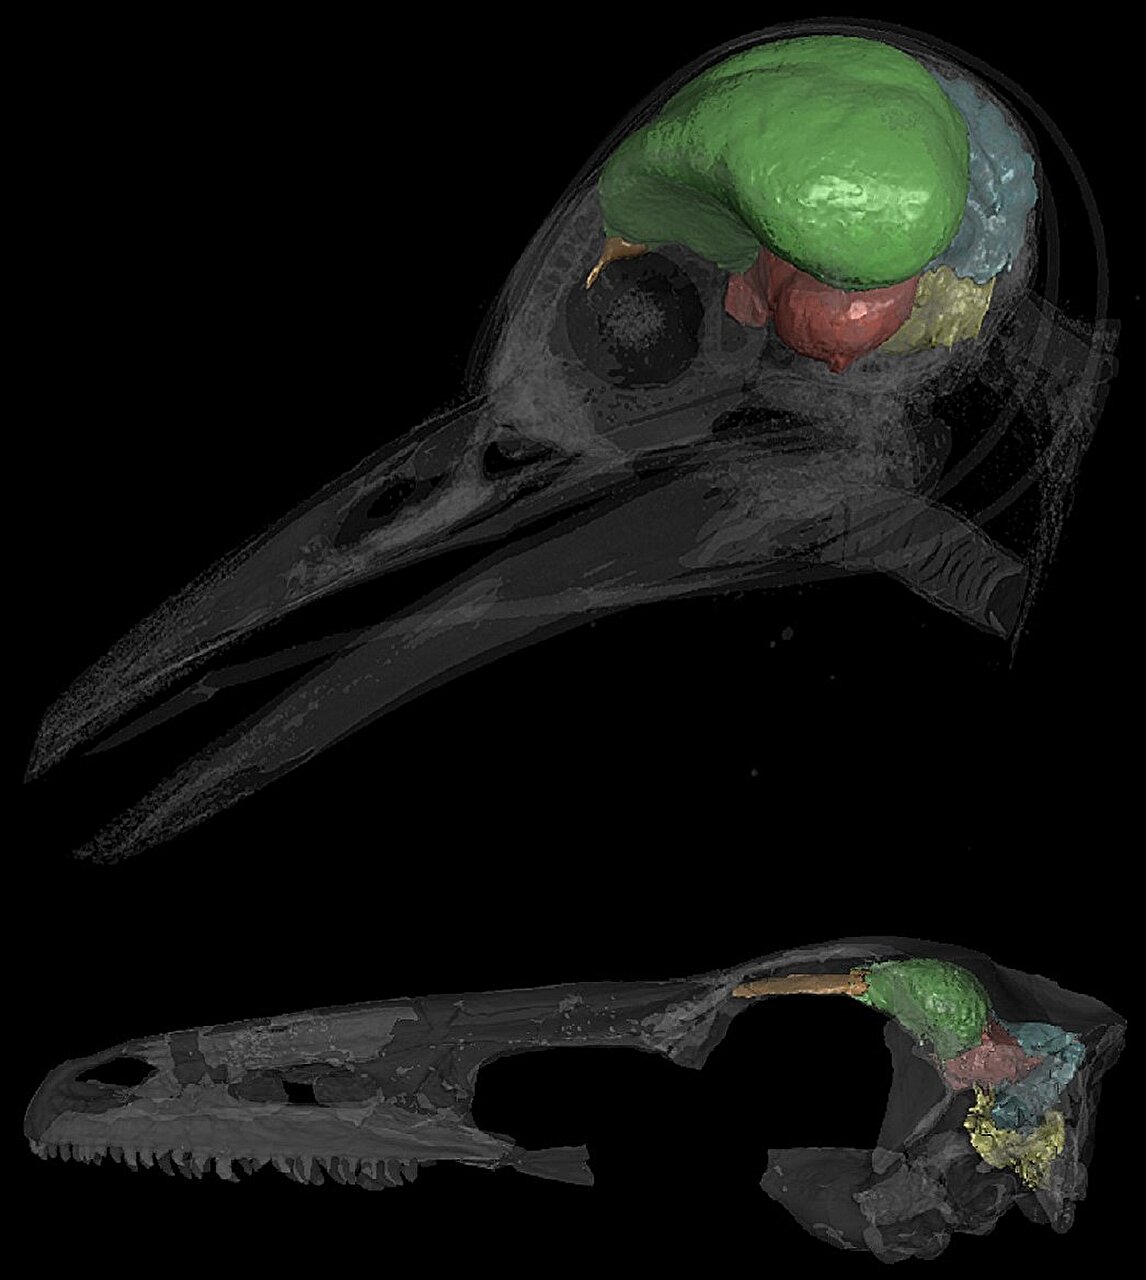 #Scientists pinpoint growth of brain’s cerebellum as key to evolution of bird flight